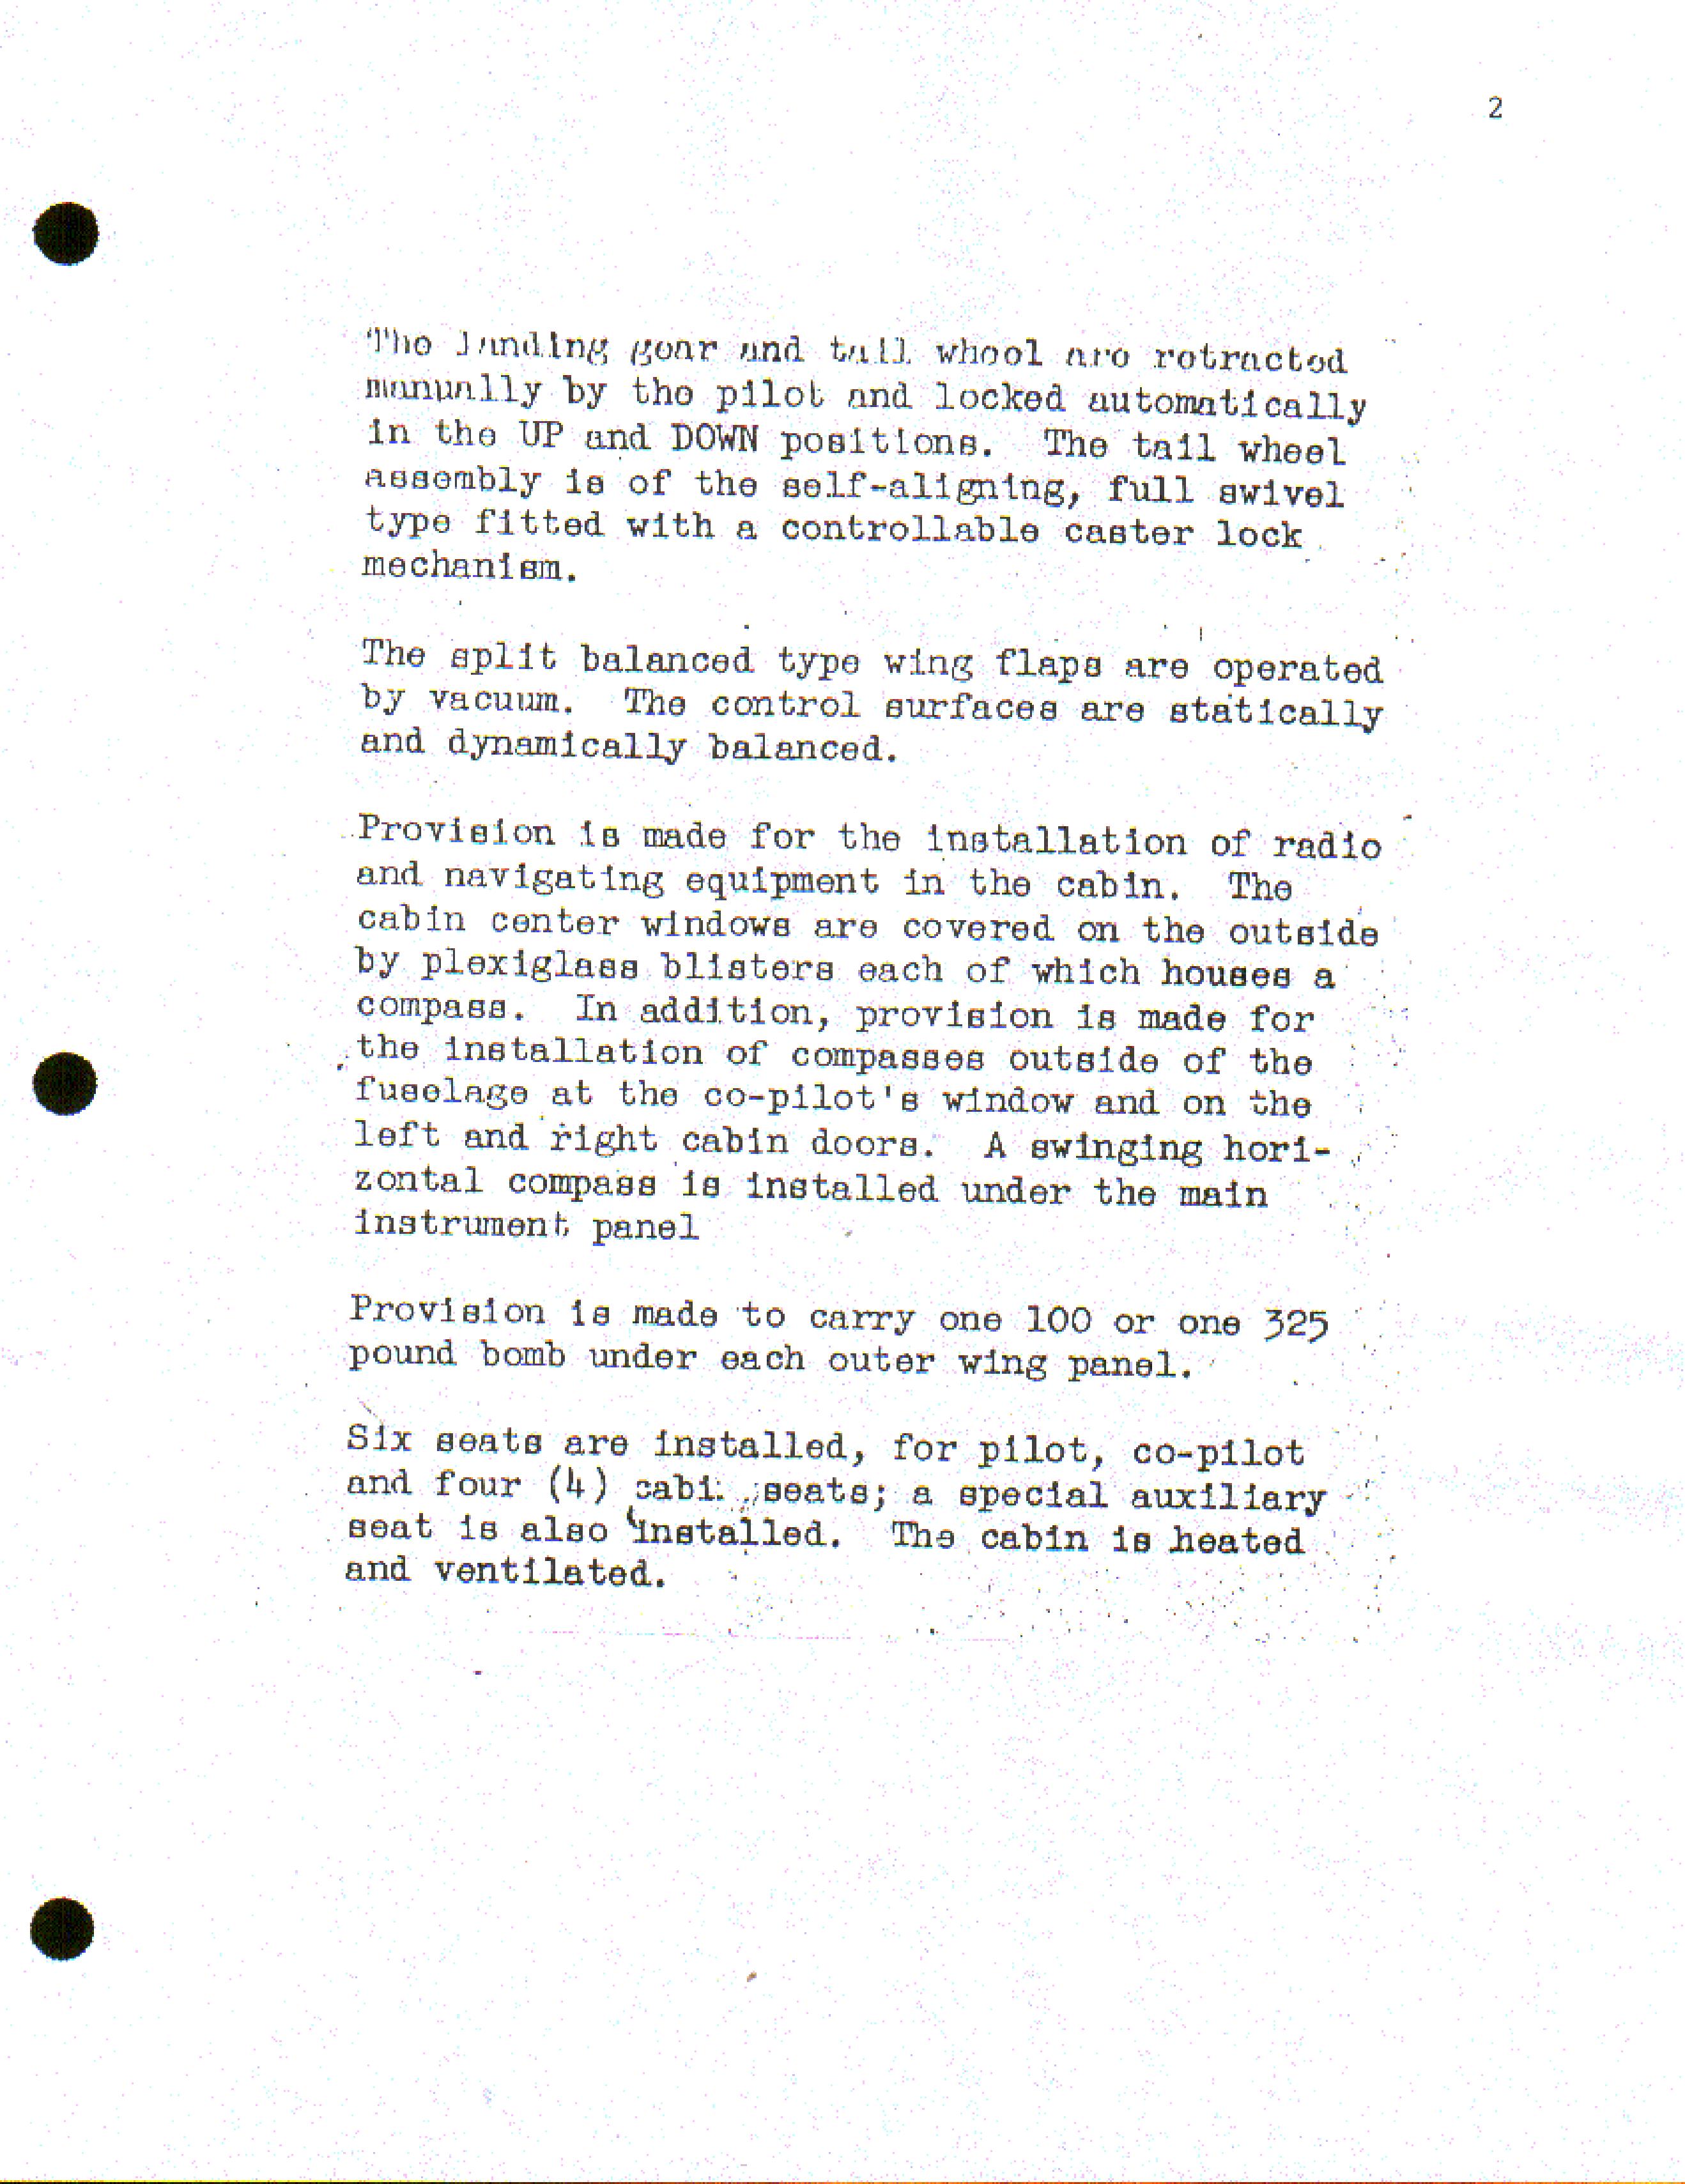 Sample page 5 from AirCorps Library document: Pilot's Handbook for Model JRF-6B, Goose 1A Airplane